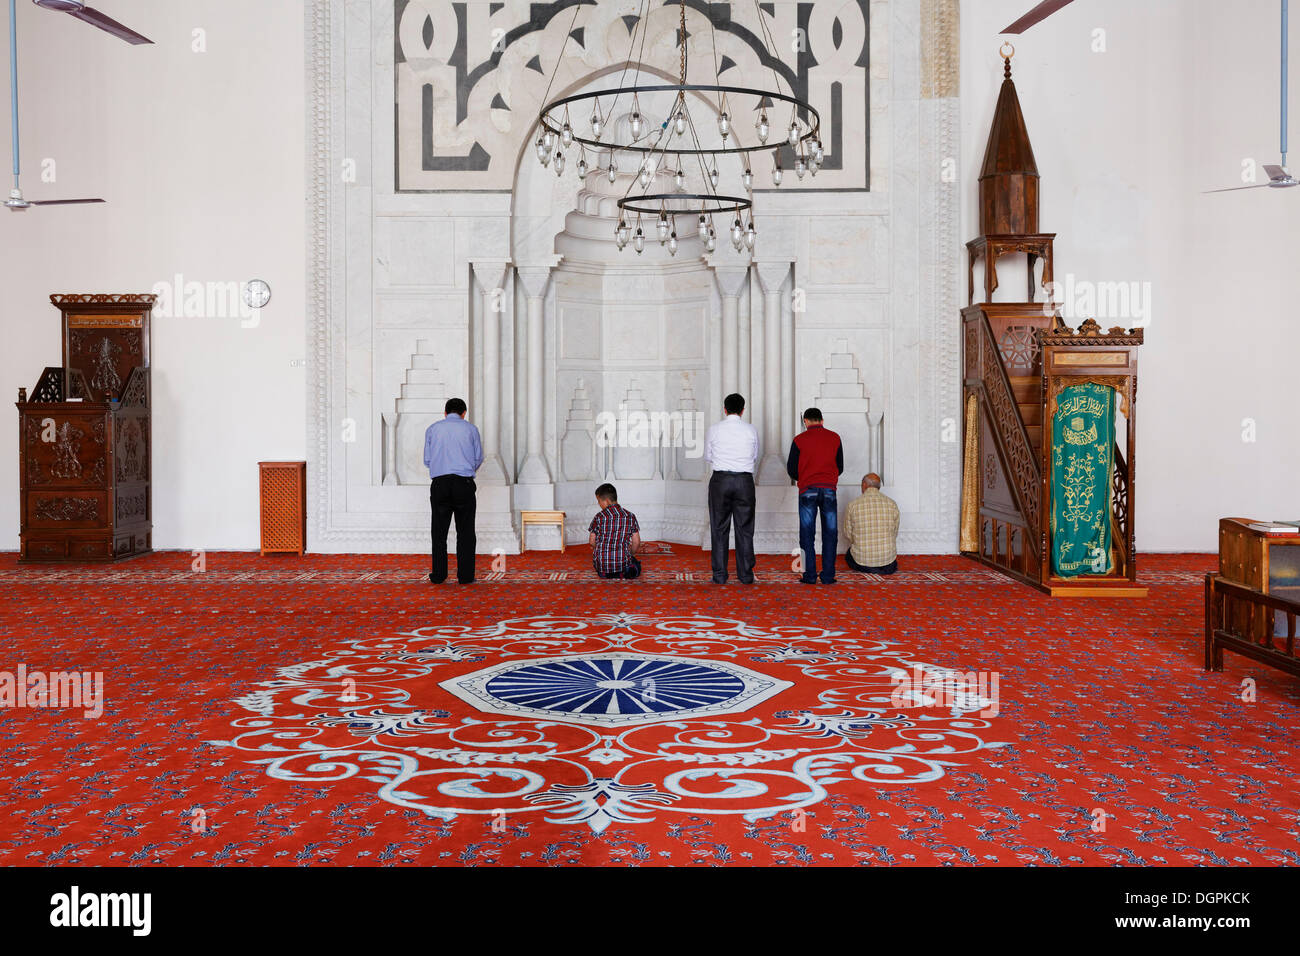 Muslims praying in the prayer room of the İsabey Mosque, Selçuk, İzmir Province, Aegean Region, Turkey Stock Photo